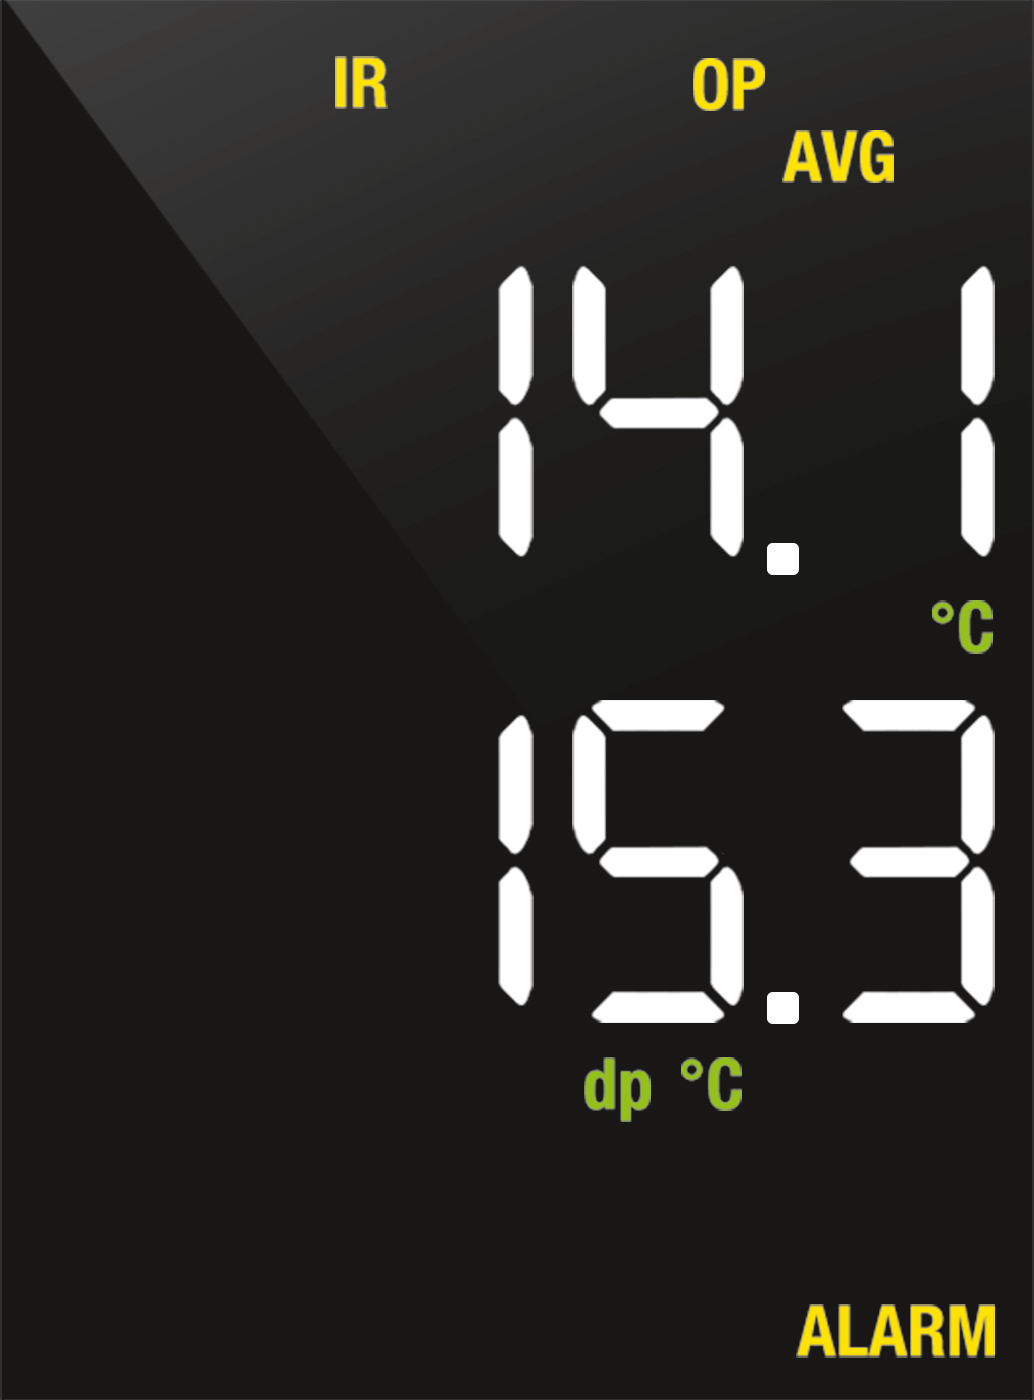 The dew point alarm is triggered because the wall surface temperature with 14.1 °C is below the dew point of 15.3 °C.